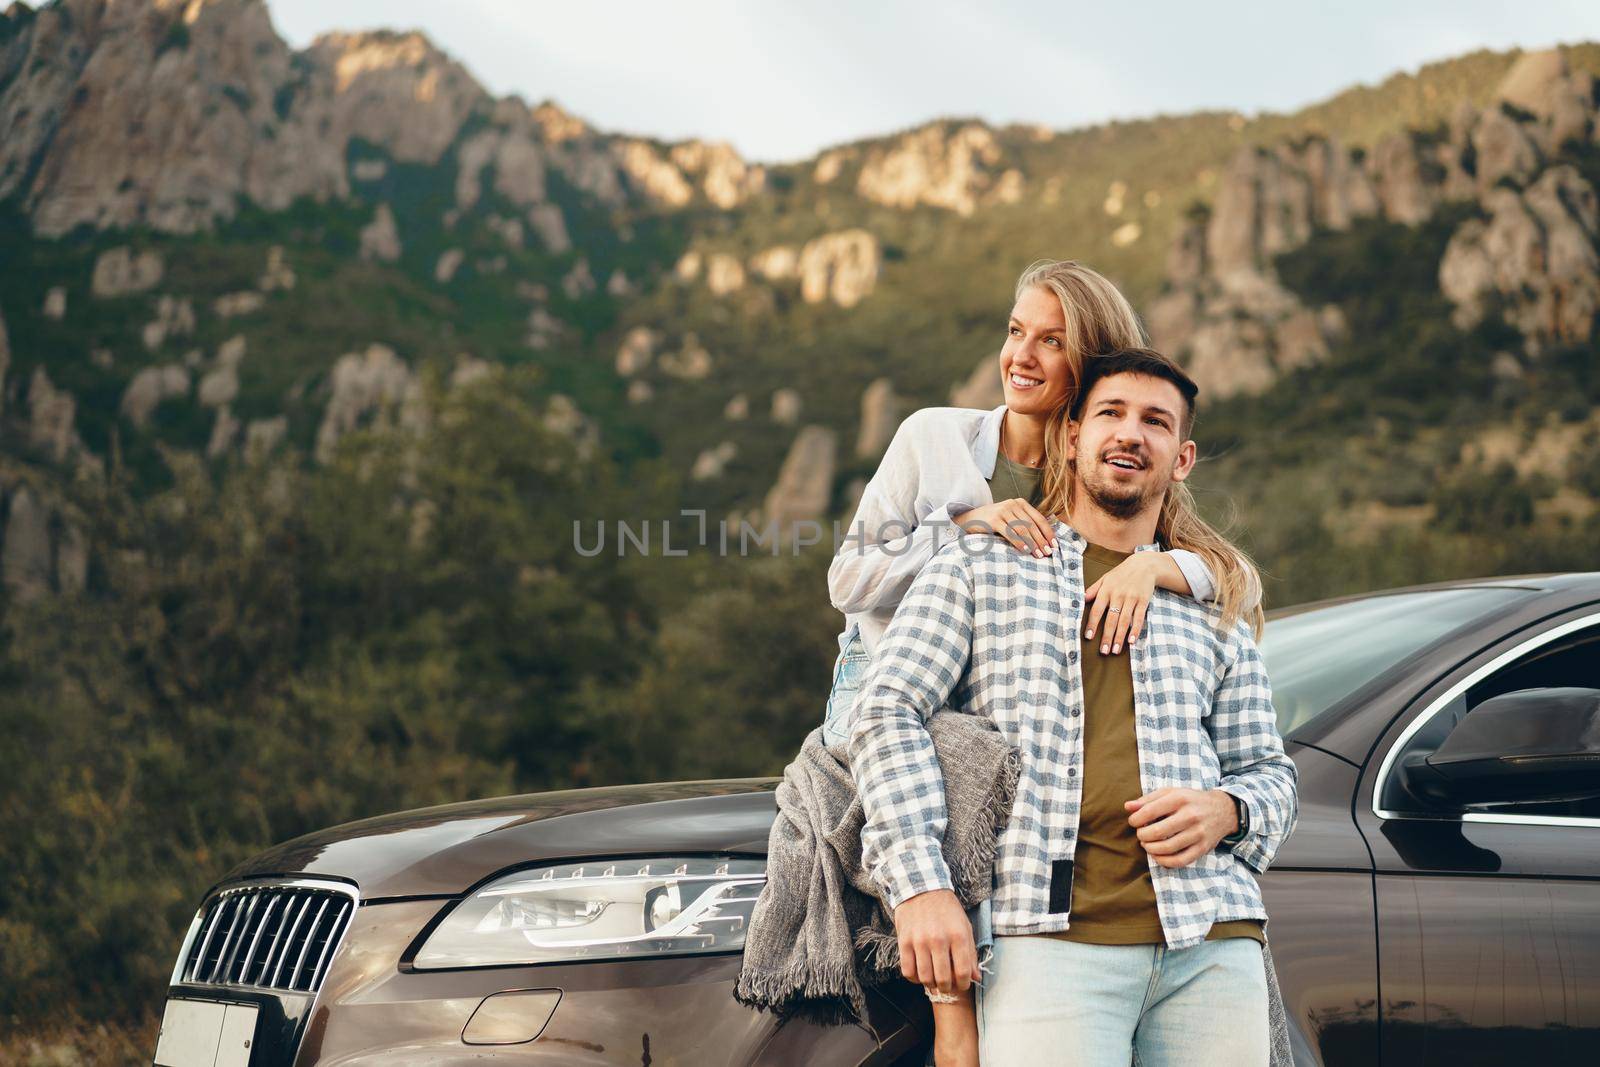 Young couple is on romantic trip to the mountains by car, close up